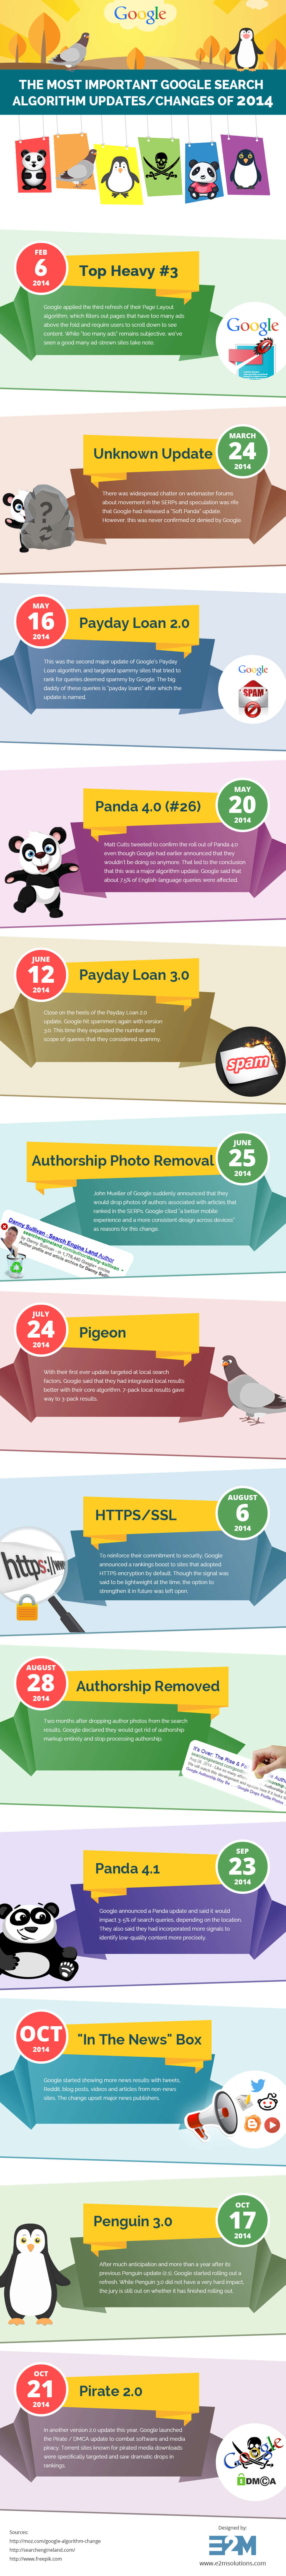 The Most Important Google Search Algorithm Updates/Changes Of 2015